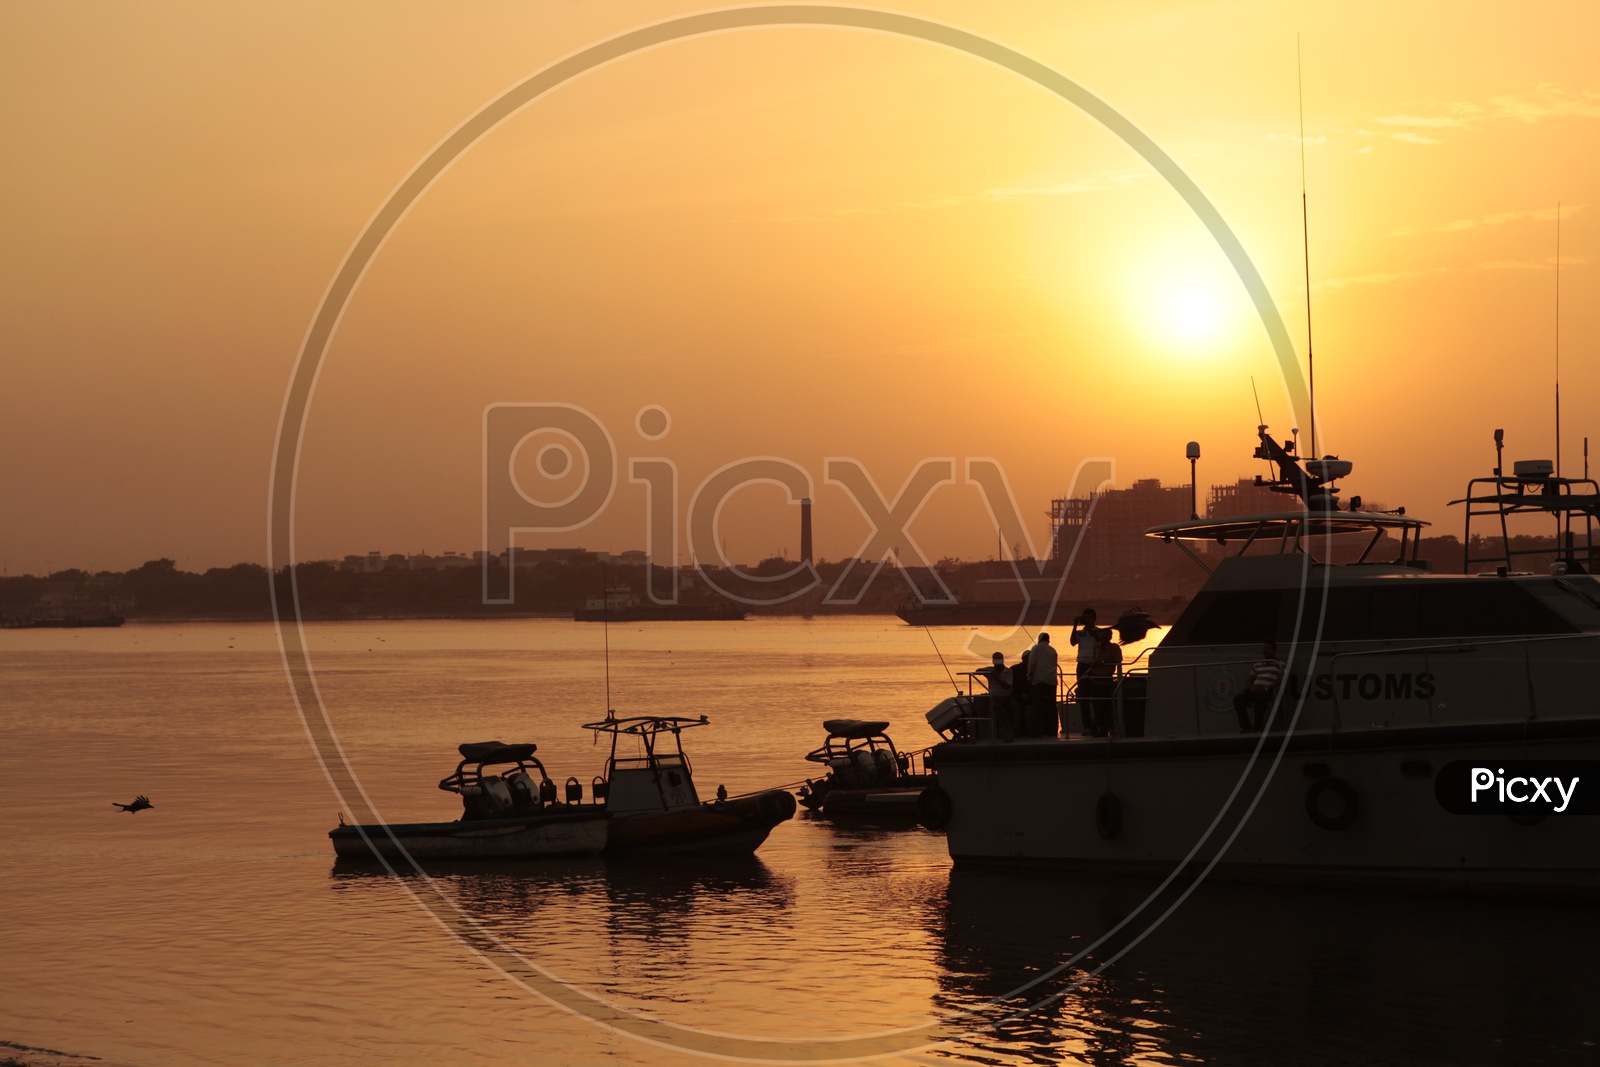 Customs Boats alongside the Hooghly River during the sunset